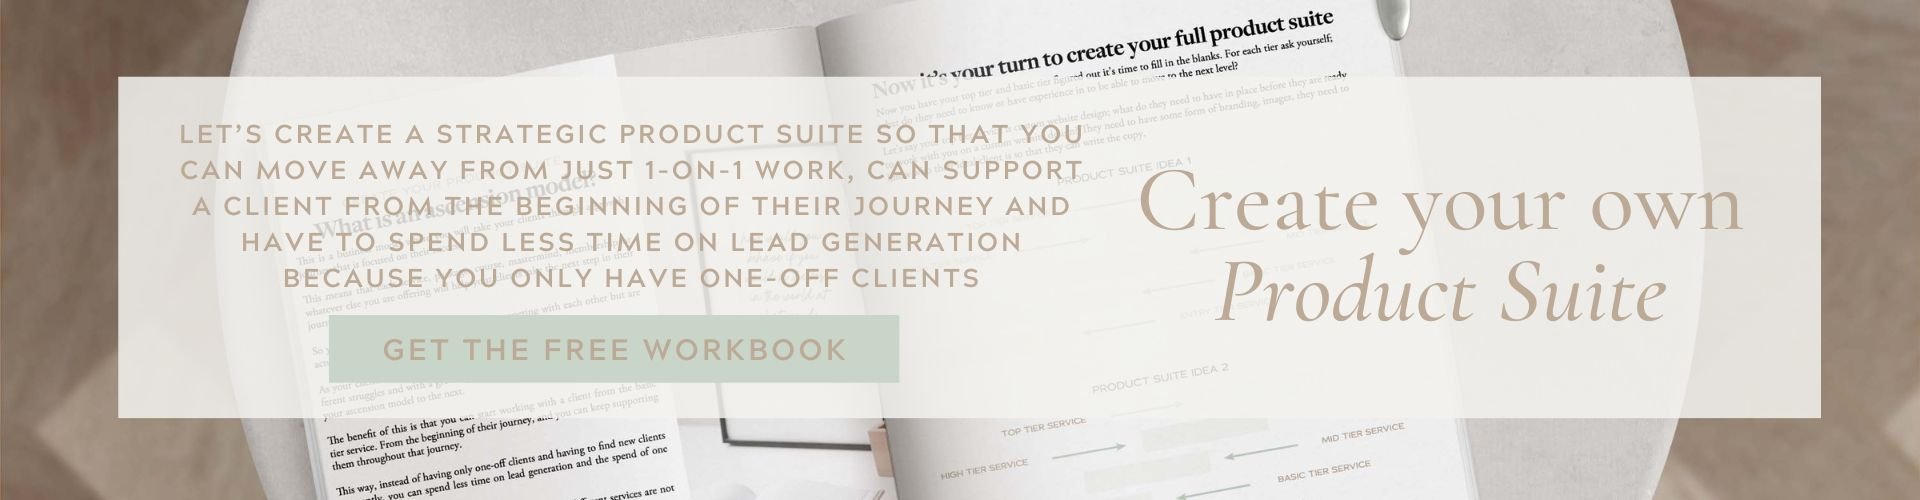 Free Resource - How to create your product suite by Flourish Online Management - Full Image.jpg (Copy) (Copy)